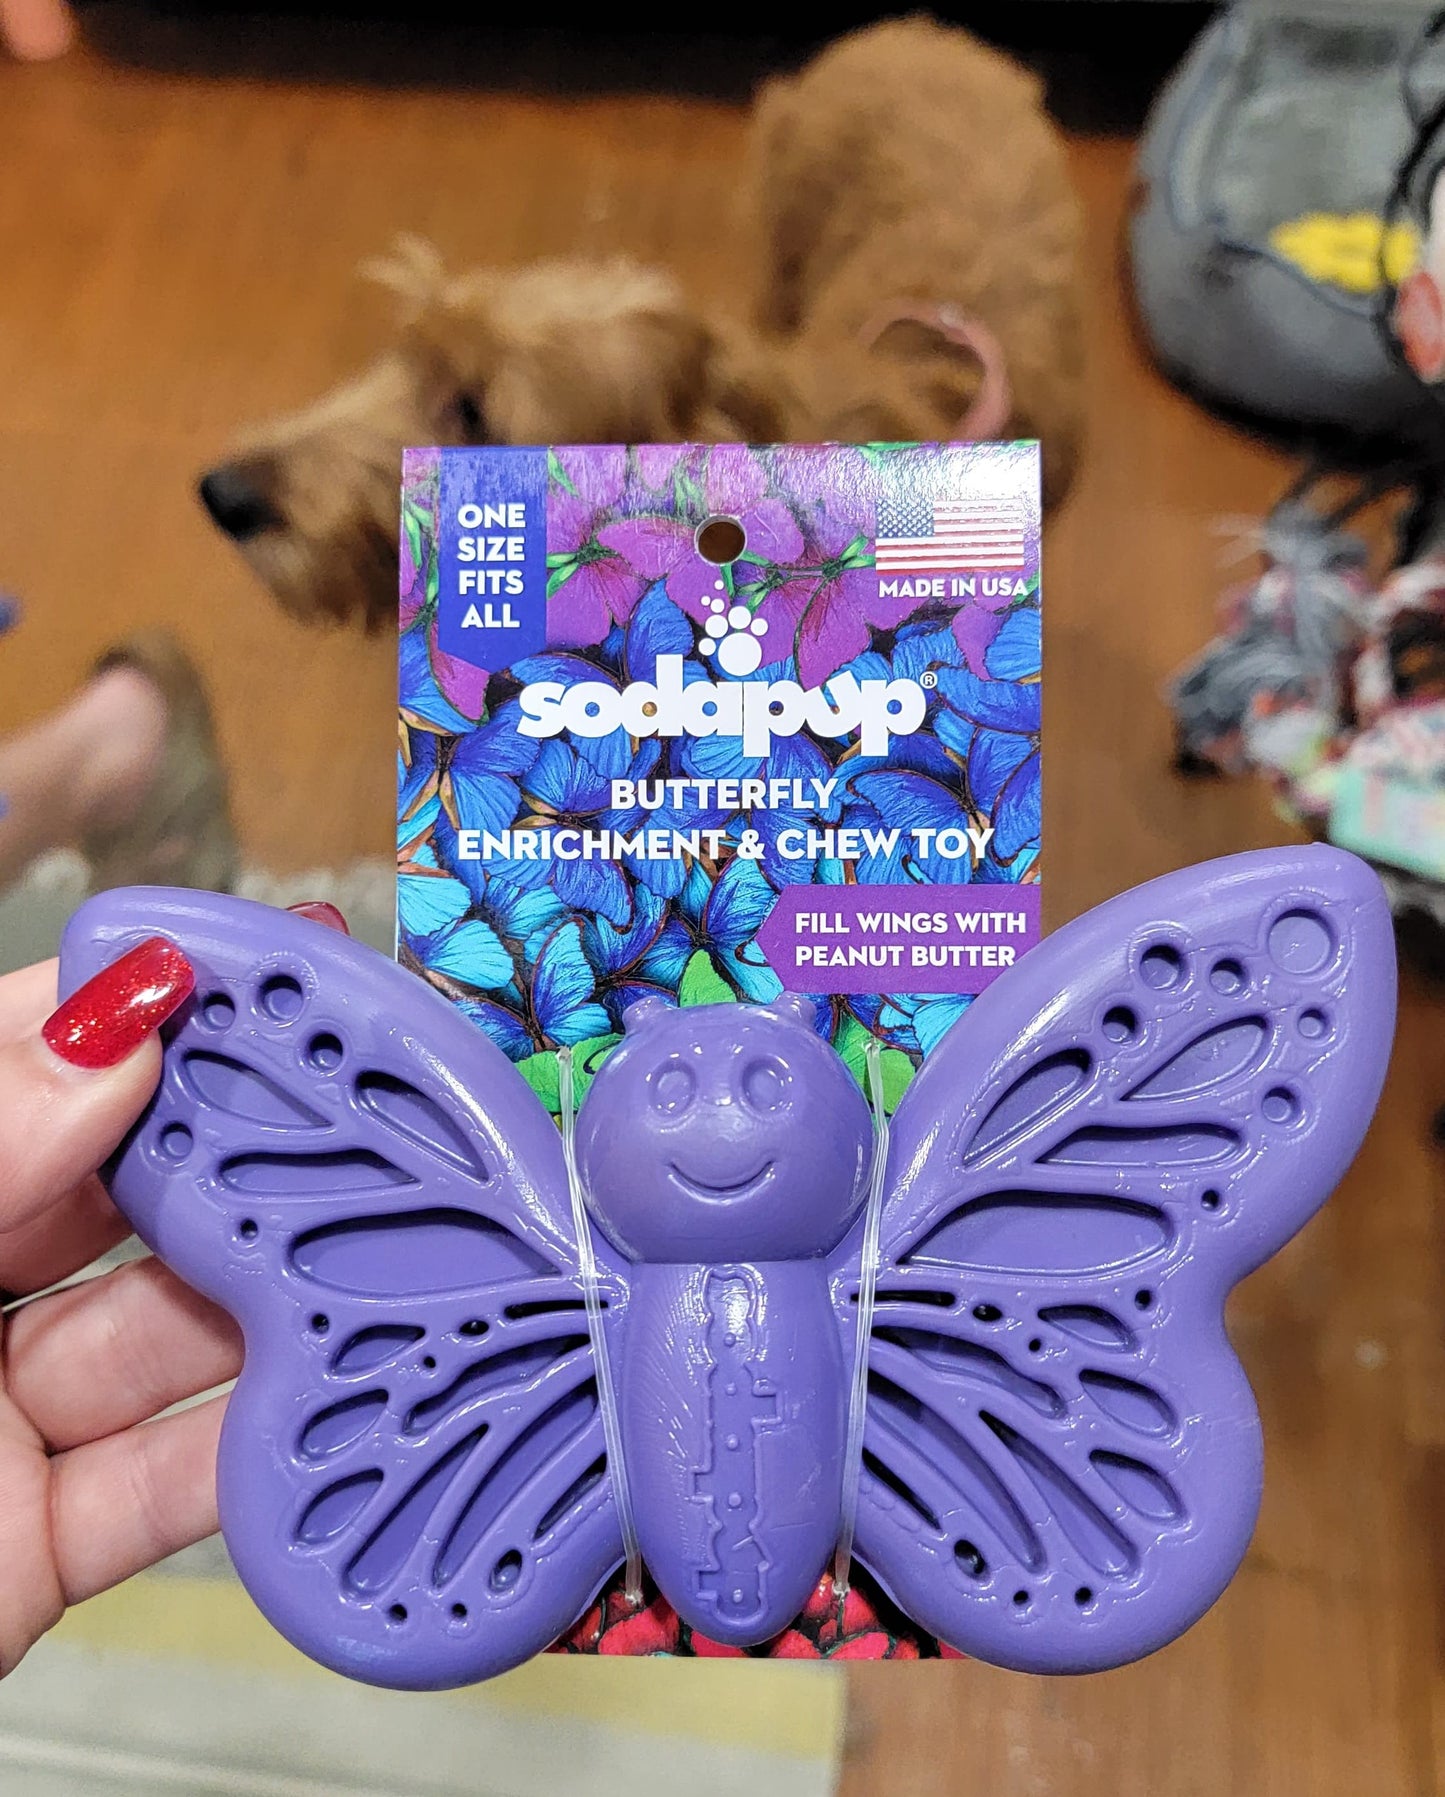 Enrichment Dog Chew Toy - Butterfly